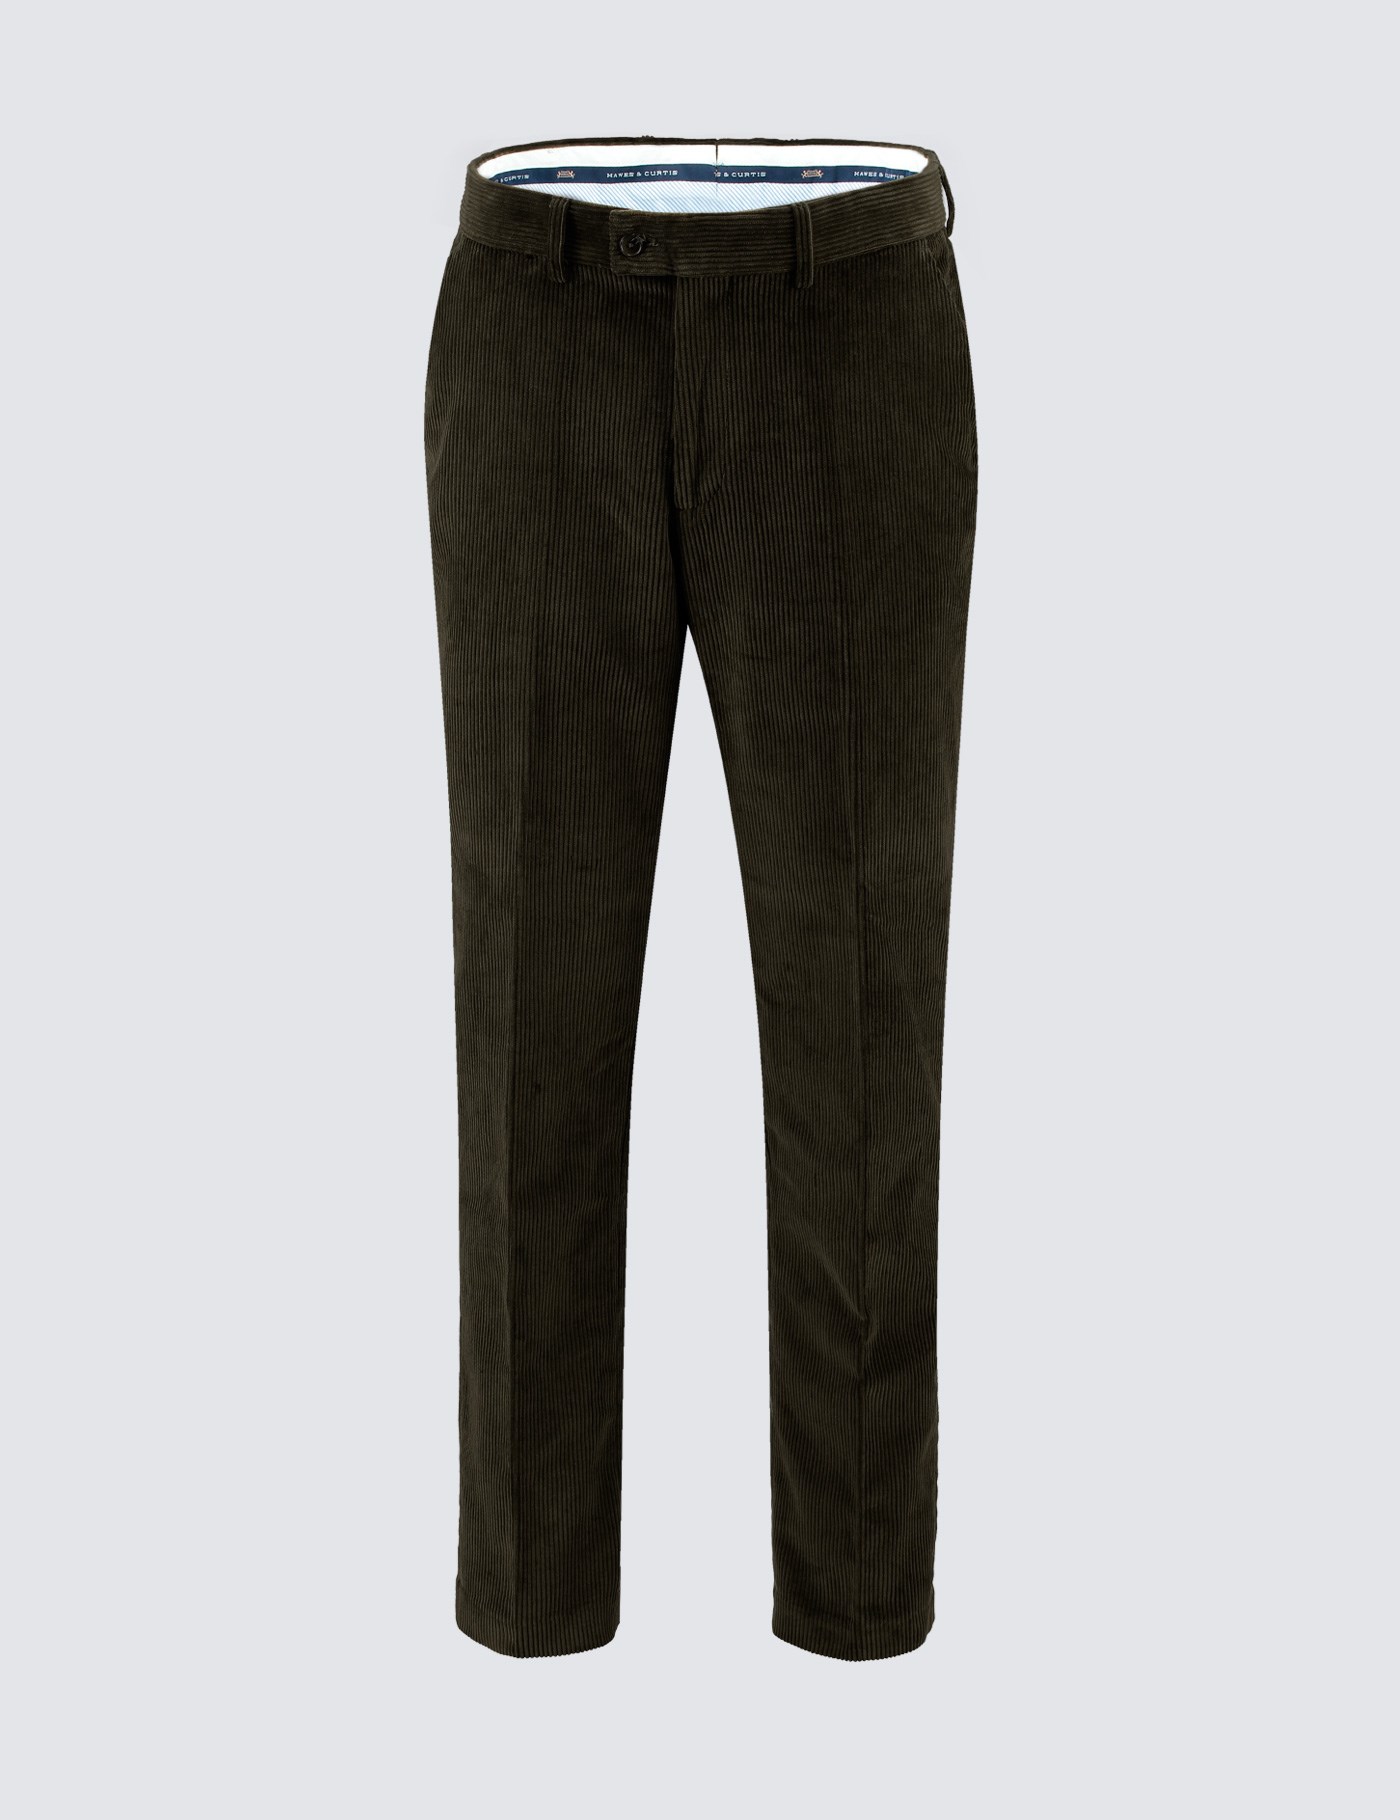 Men's Olive Green Regular Fit Corduroy Trousers | Hawes & Curtis